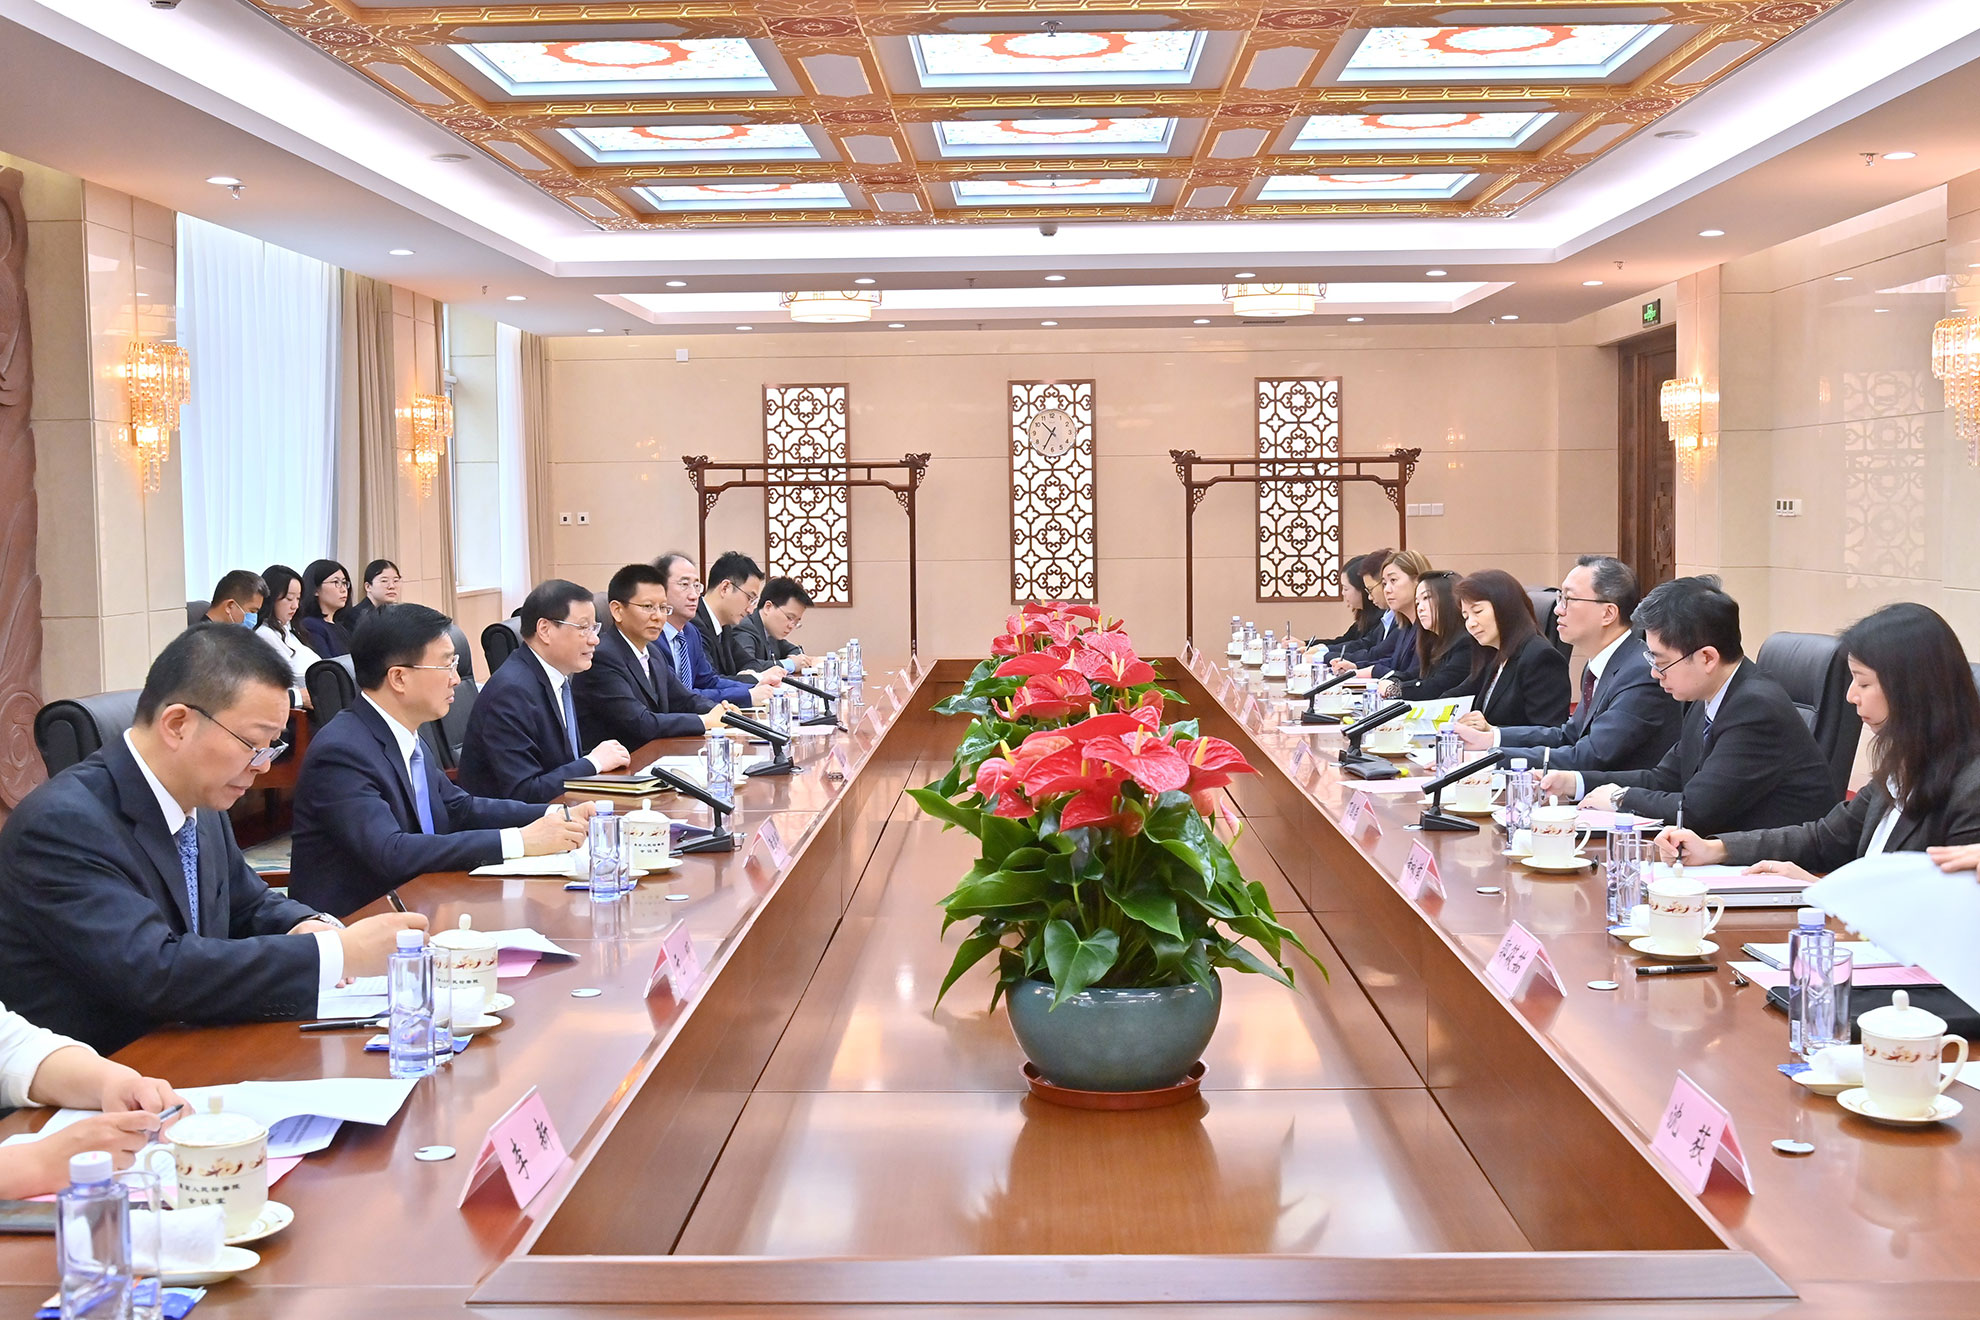 The Secretary for Justice, Mr Paul Lam, SC (third right), calls on the Supreme People's Procuratorate and meets with the Procurator-General, Mr Ying Yong (third left), this morning (May 30) in Beijing. Photo shows both sides in the meeting.